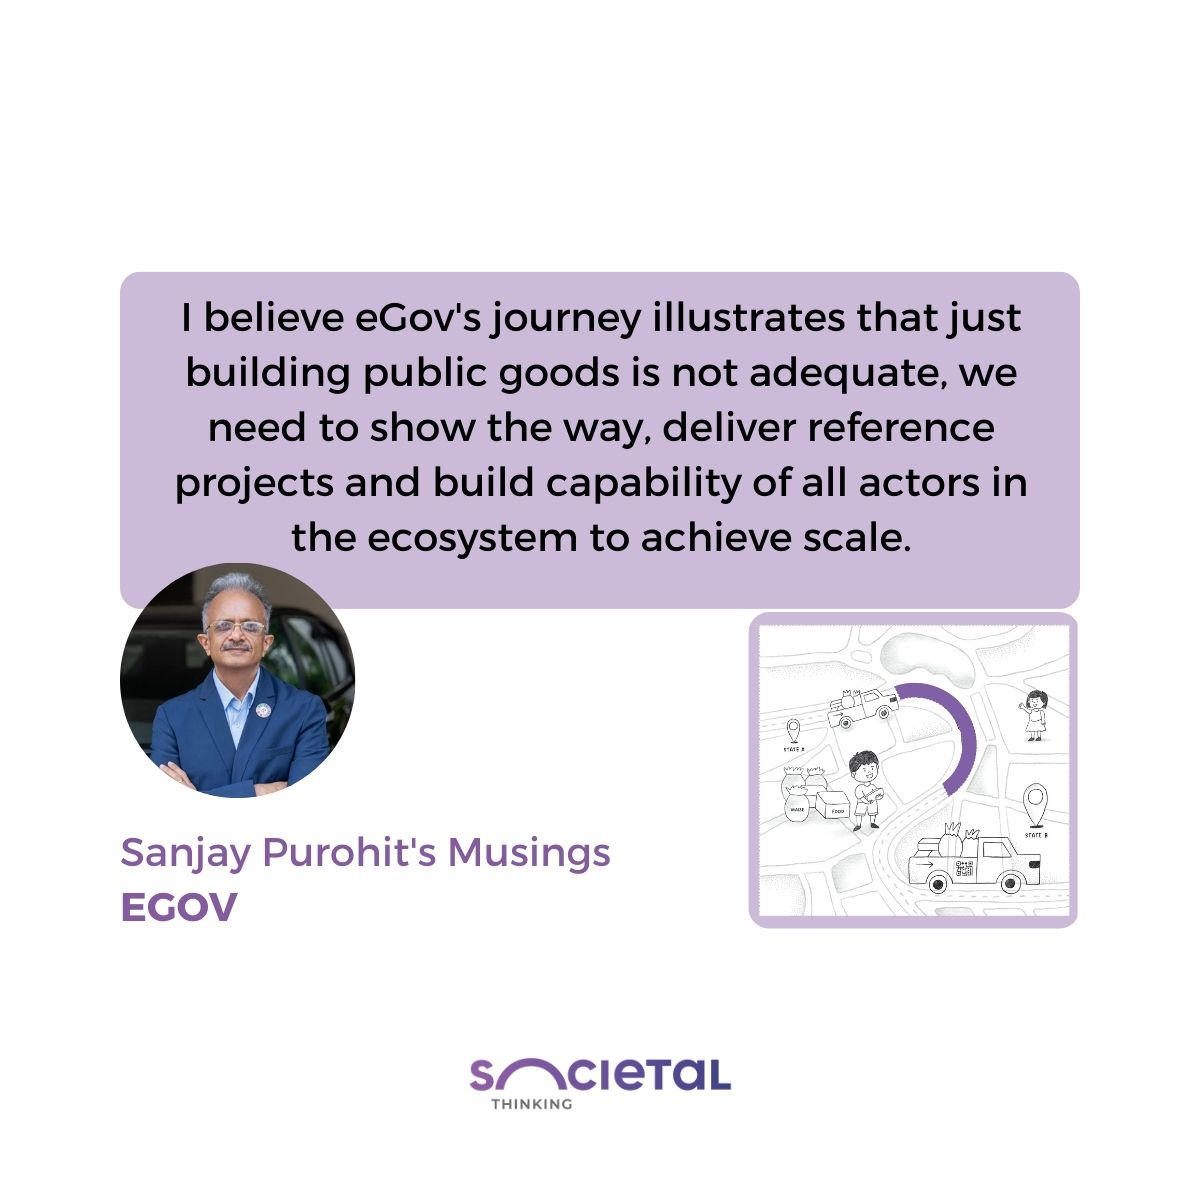 @VirajPositive & @eGovFoundation's journey in #SocietalMuse transitions from point solutions to #platforms & #ecosystems to increase the ecosystem's capacity to solve.

@SanjayPurohitM reflects.

Read the #SocietalThinking story of eGov:
bit.ly/smtegov

#findyourmuse